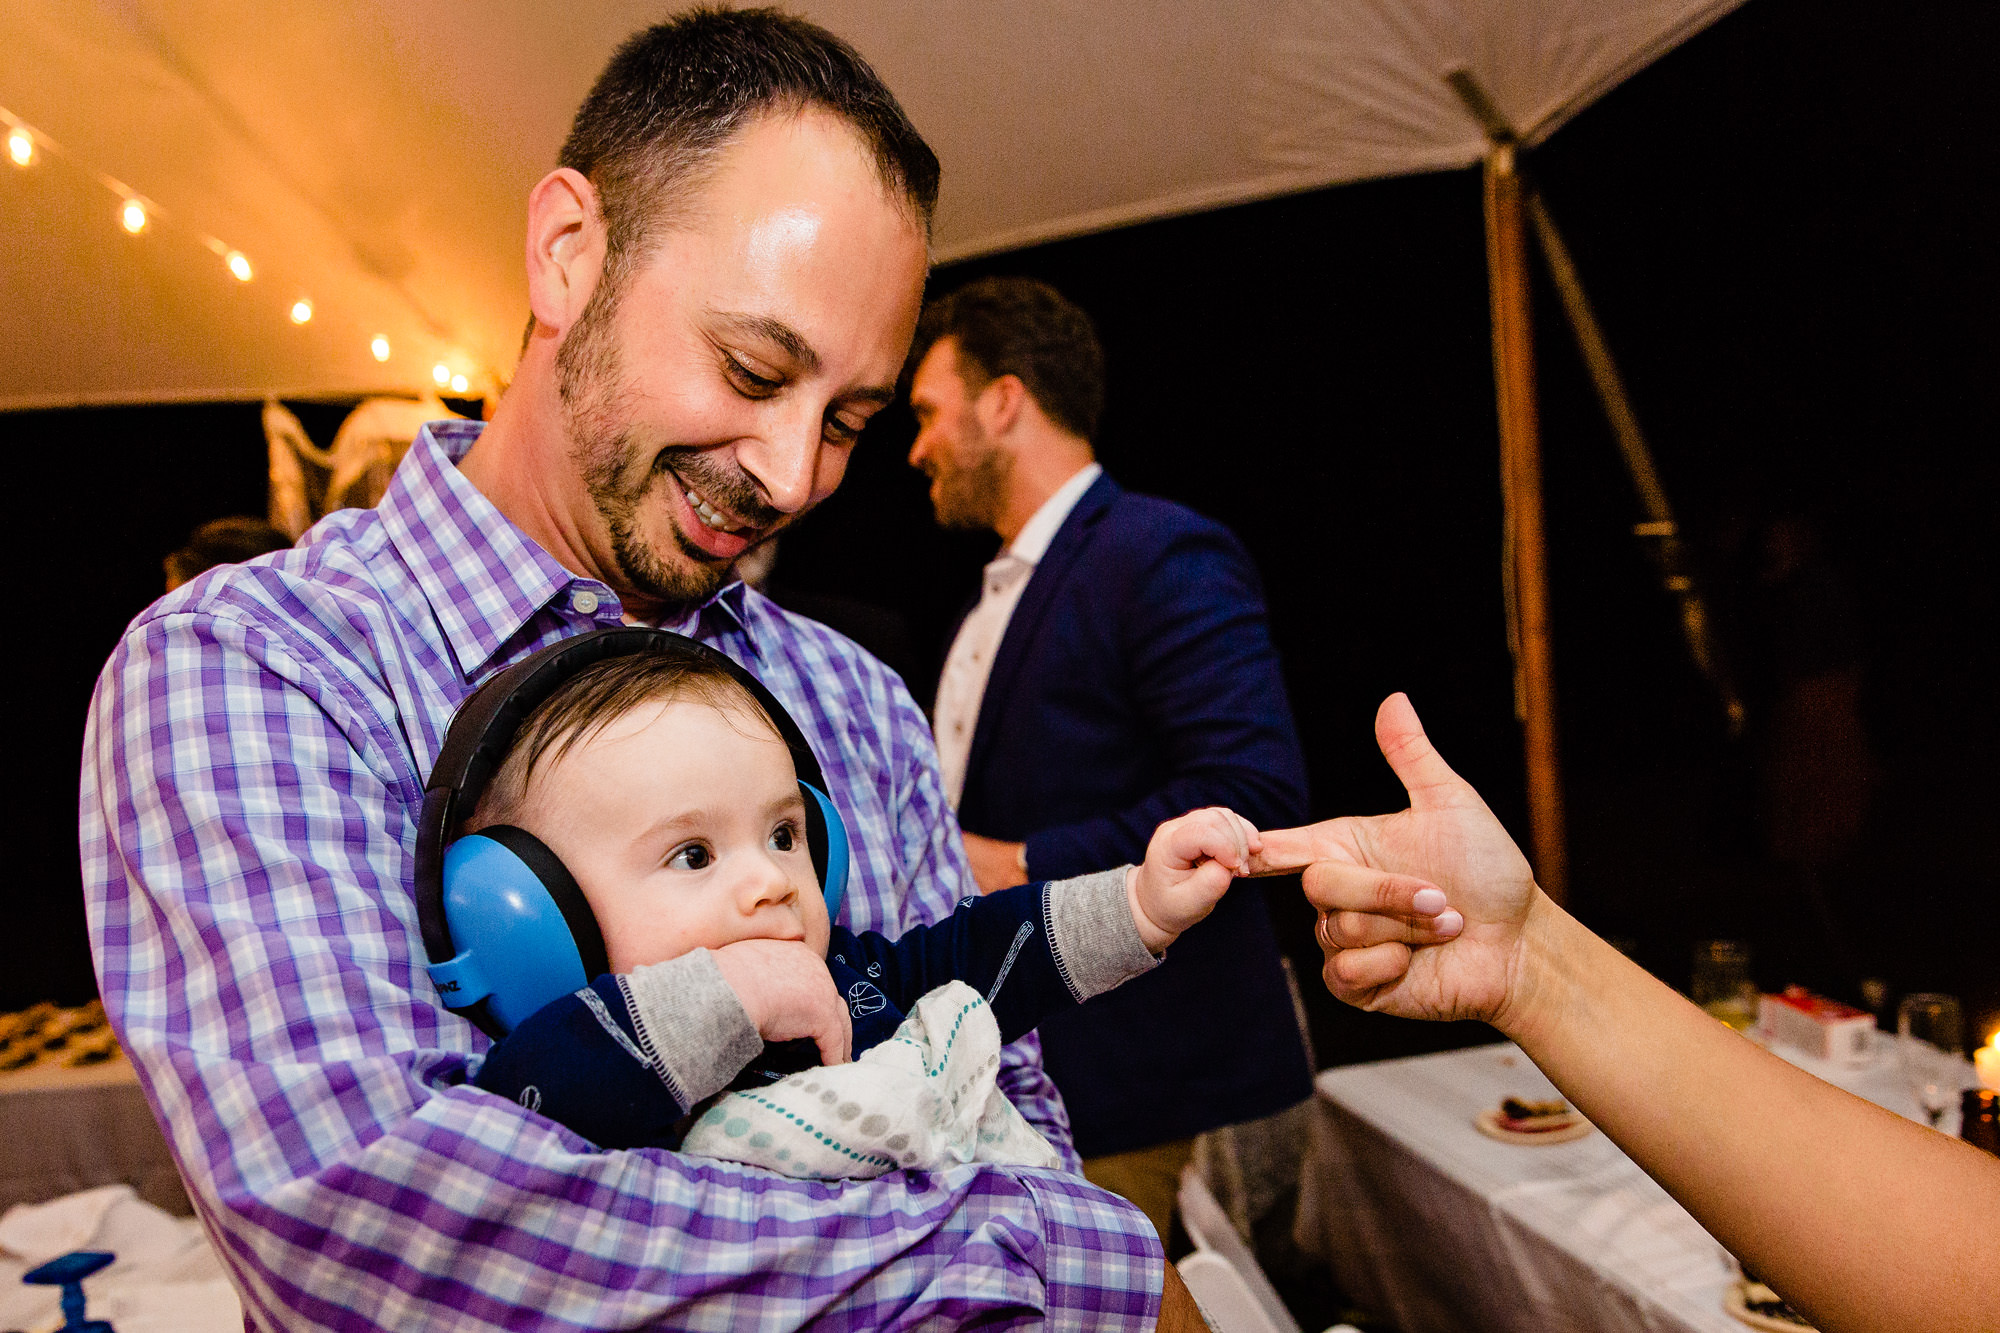 A baby at a wedding snatches an adult's hand during a Maine wedding